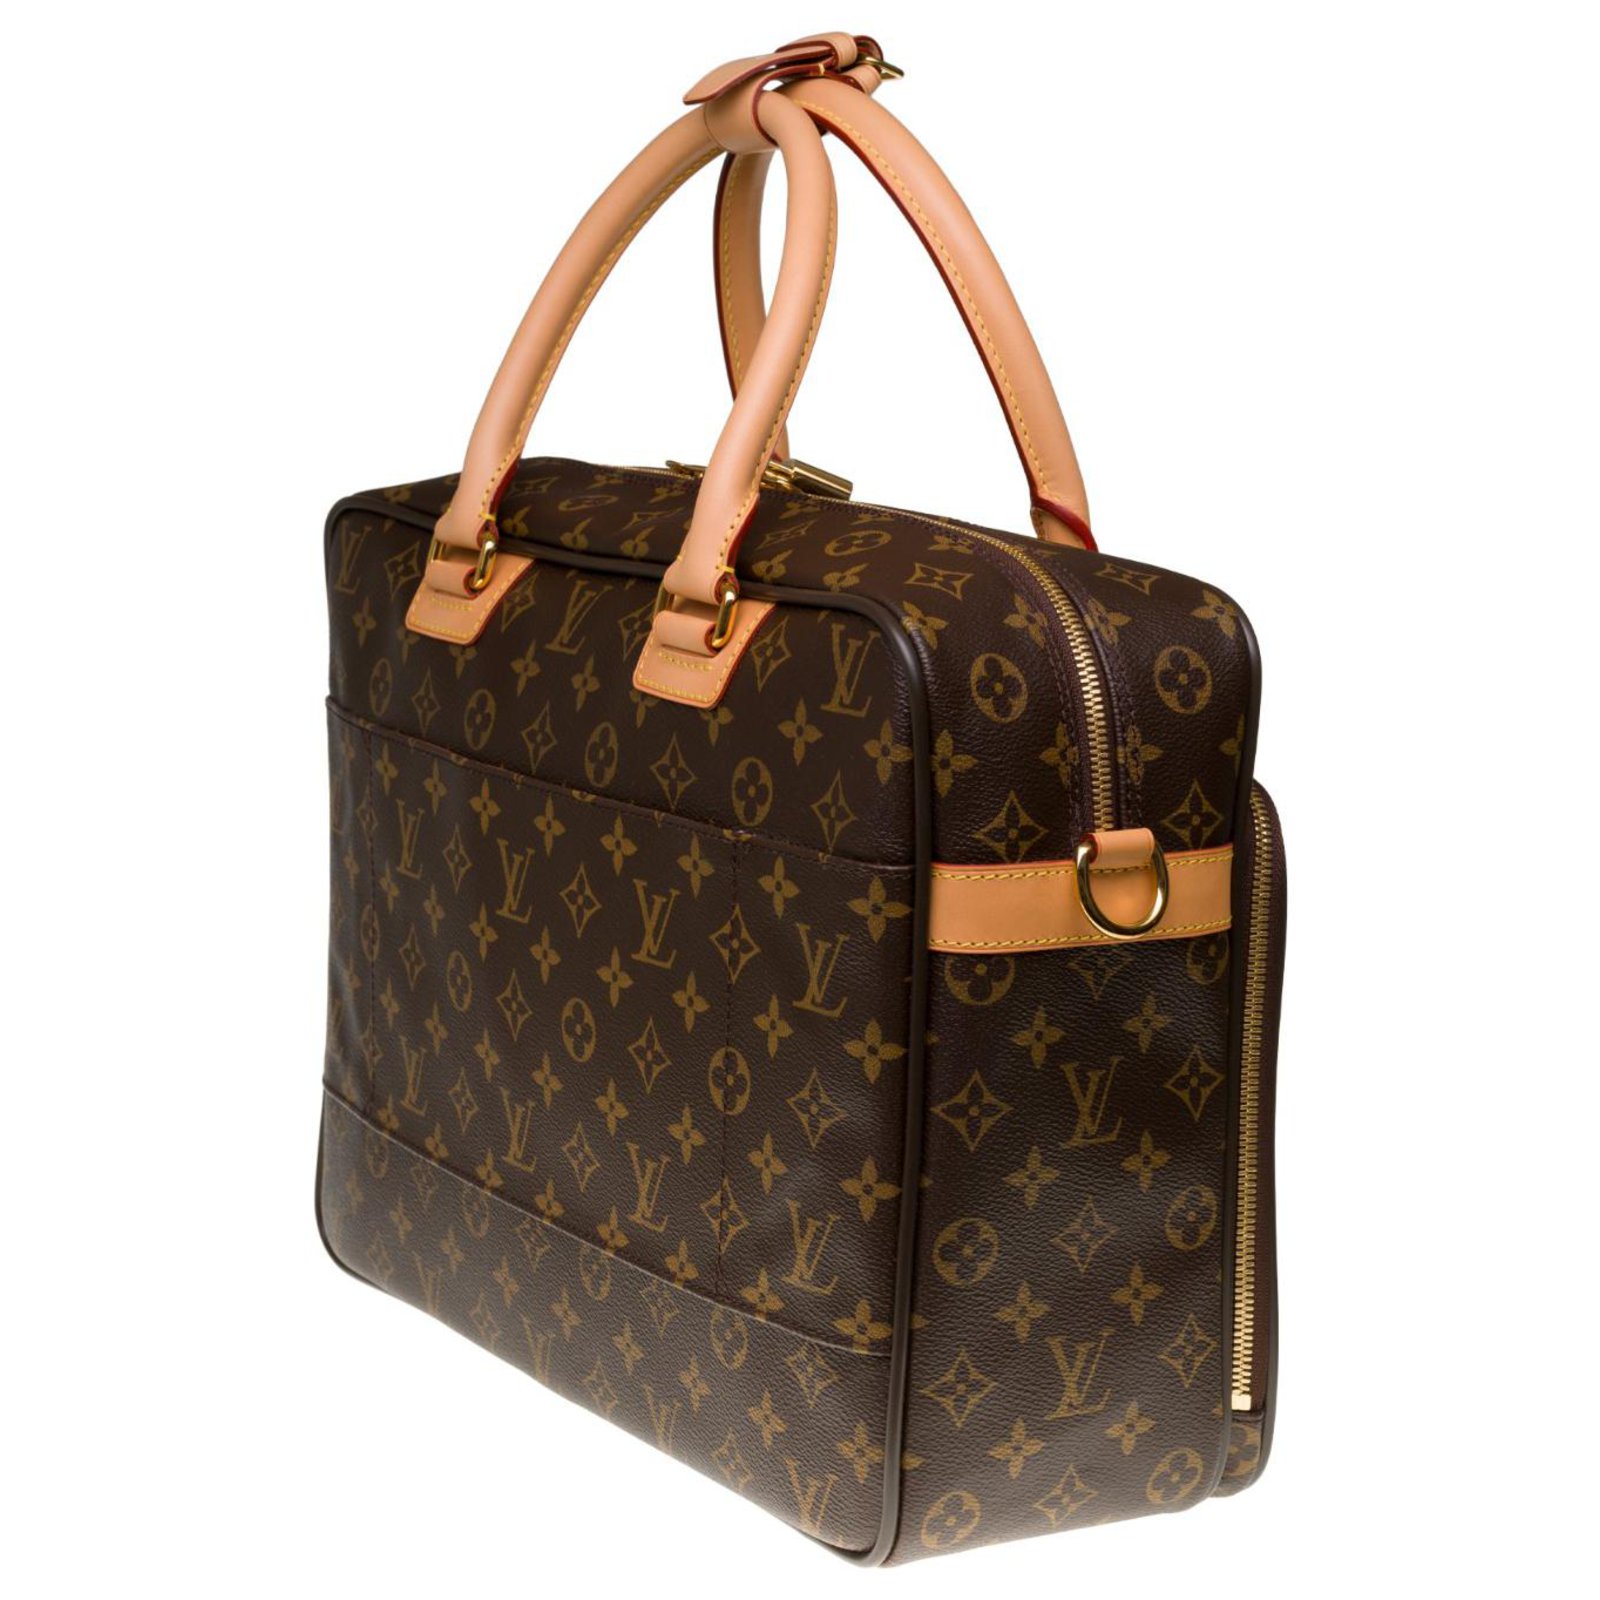 Louis Vuitton travel bag with shoulder strap in black canvas and